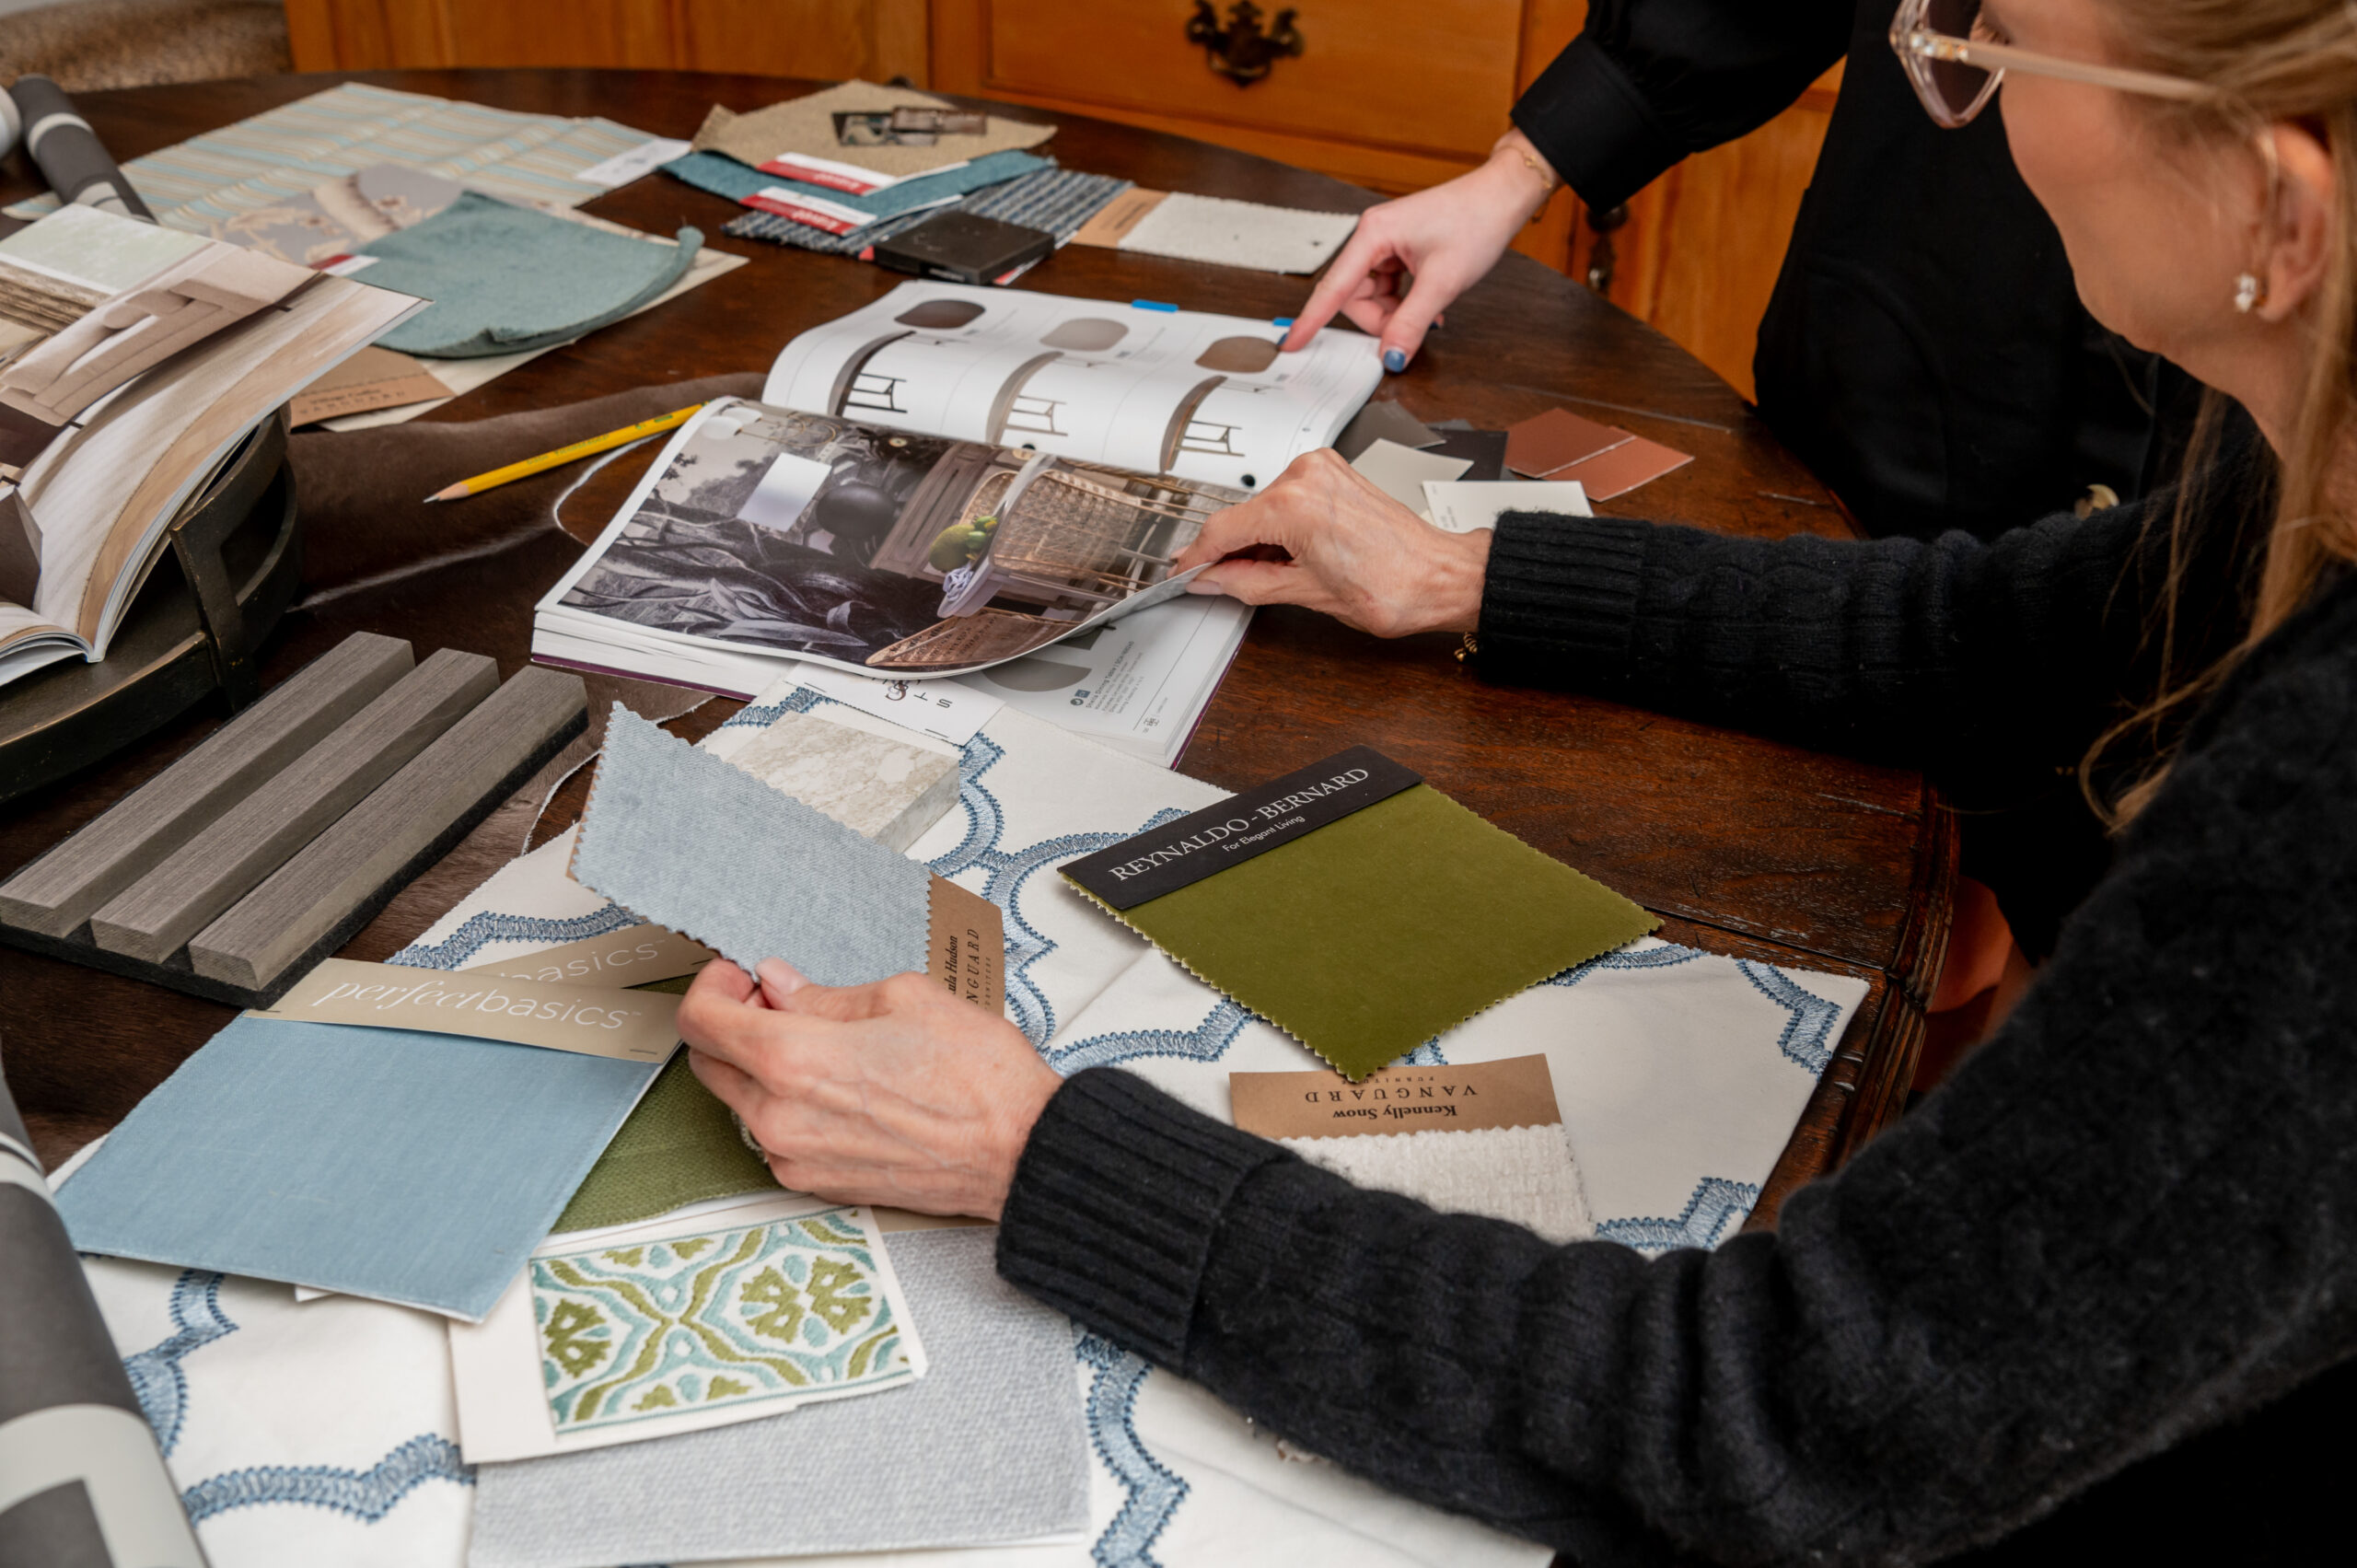 Women planning an interior design project with Textile design layouts of different fabrics